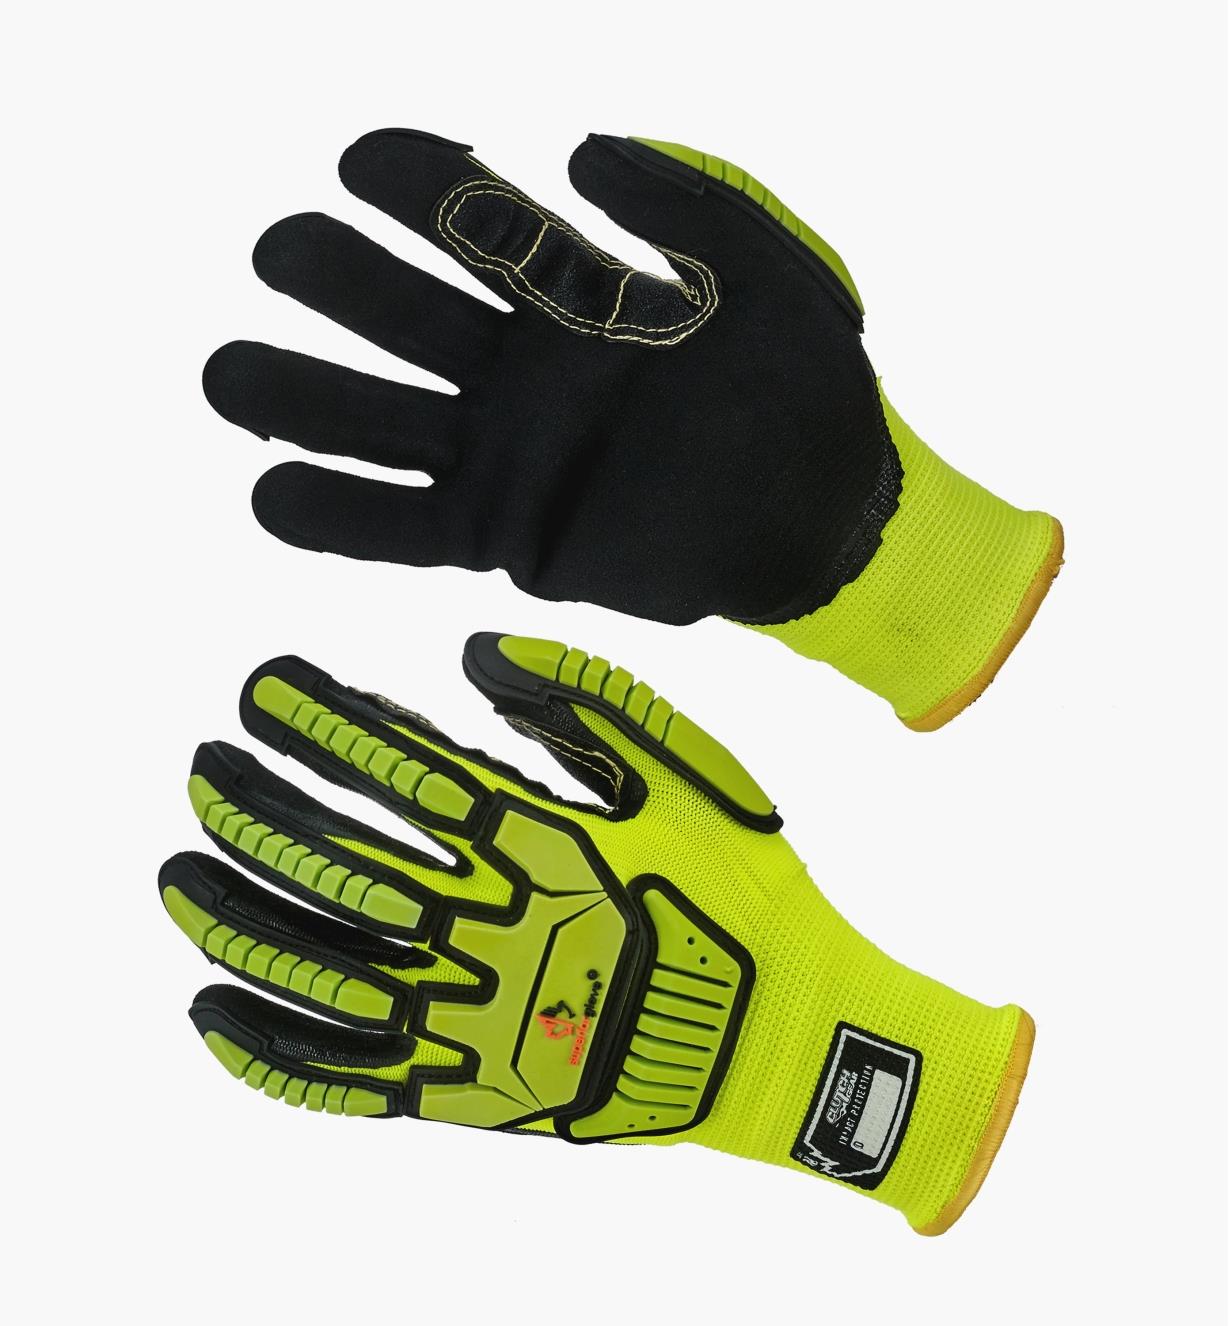 Clutch Gear Impact-Resistant Gloves